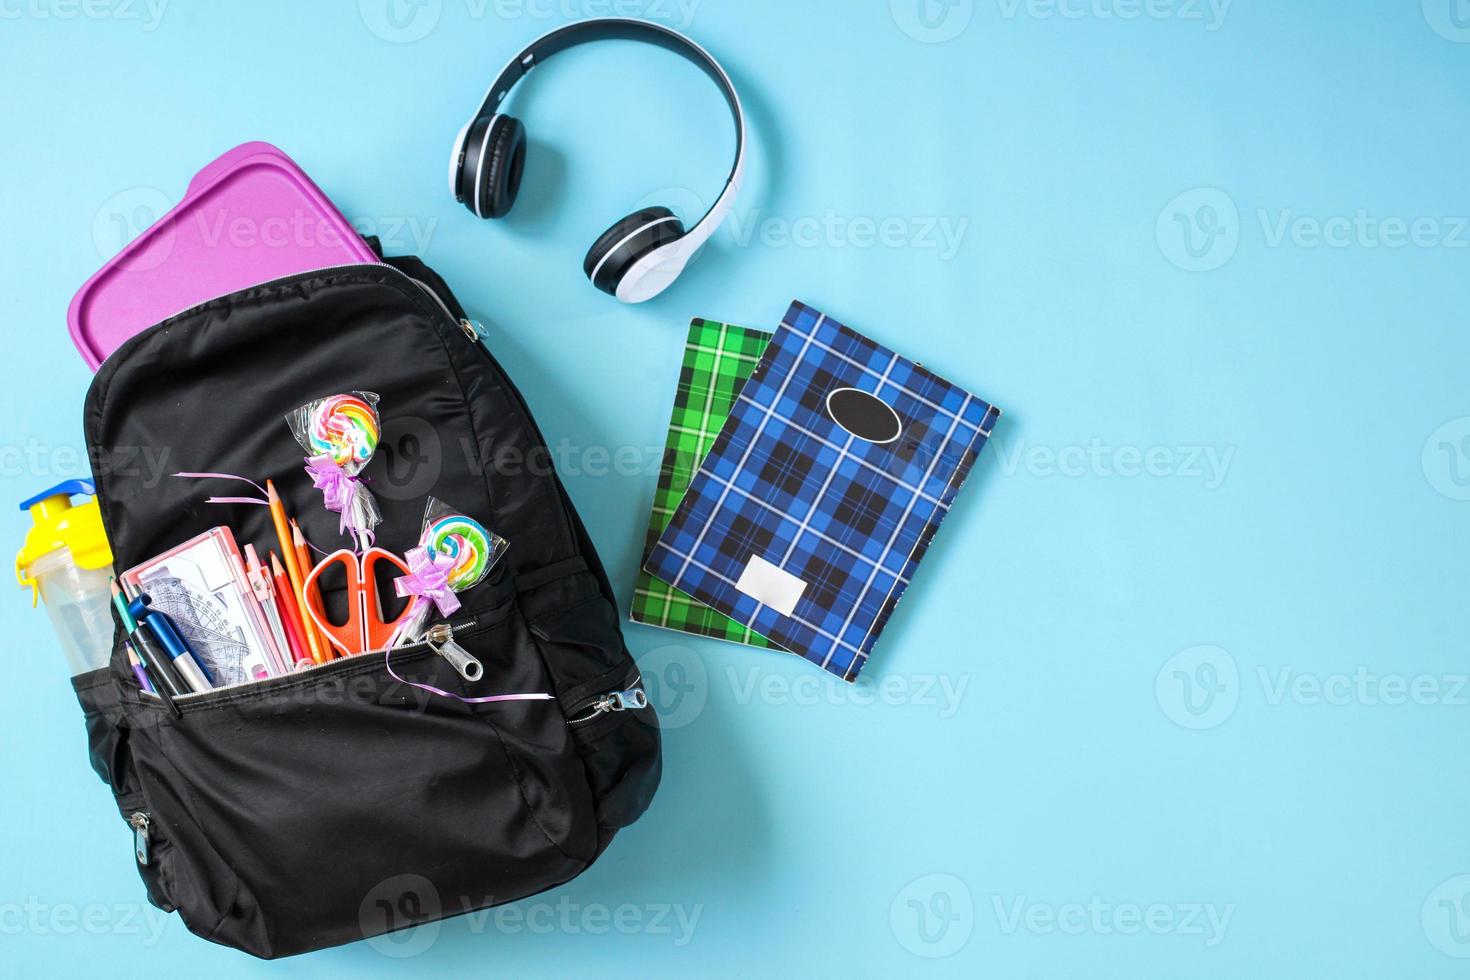 Creative flat lay School bag with school supplies on blue background for back to school concept photo